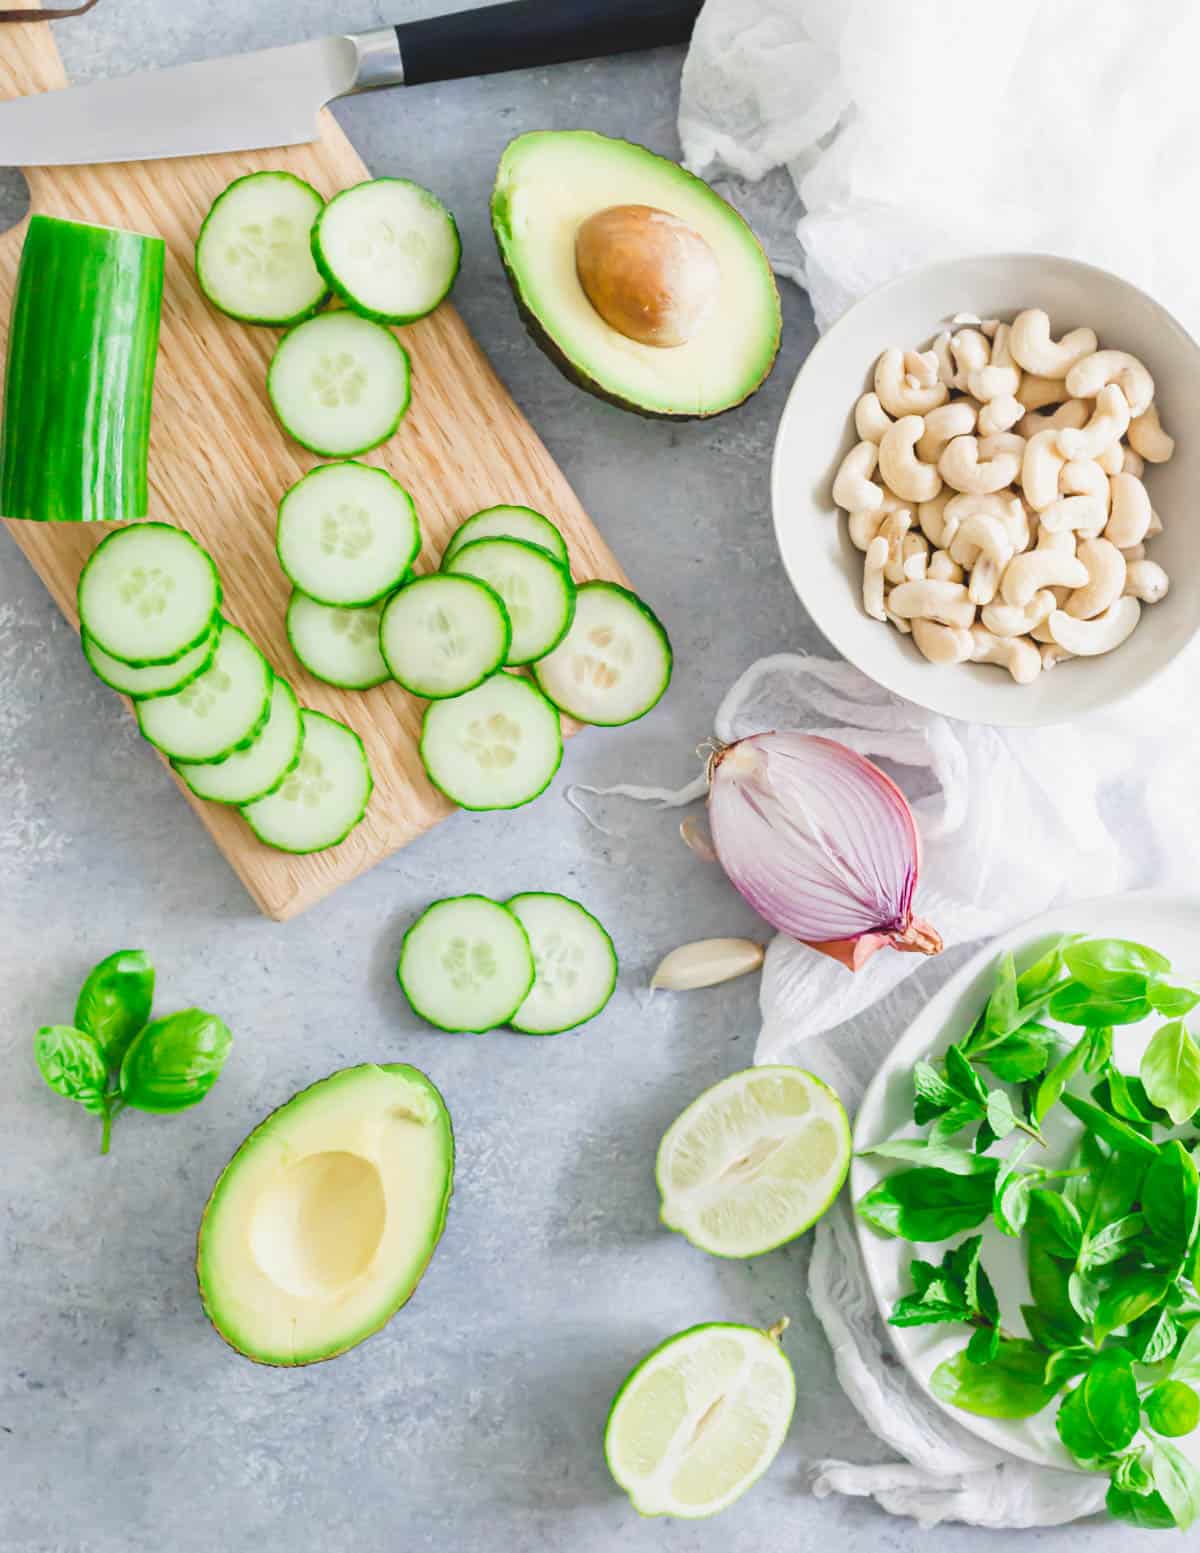 Ingredients to make cucumber gazpacho including cucumbers, soaked cashews, shallot, avocado, mint, basil, lime and garlic.